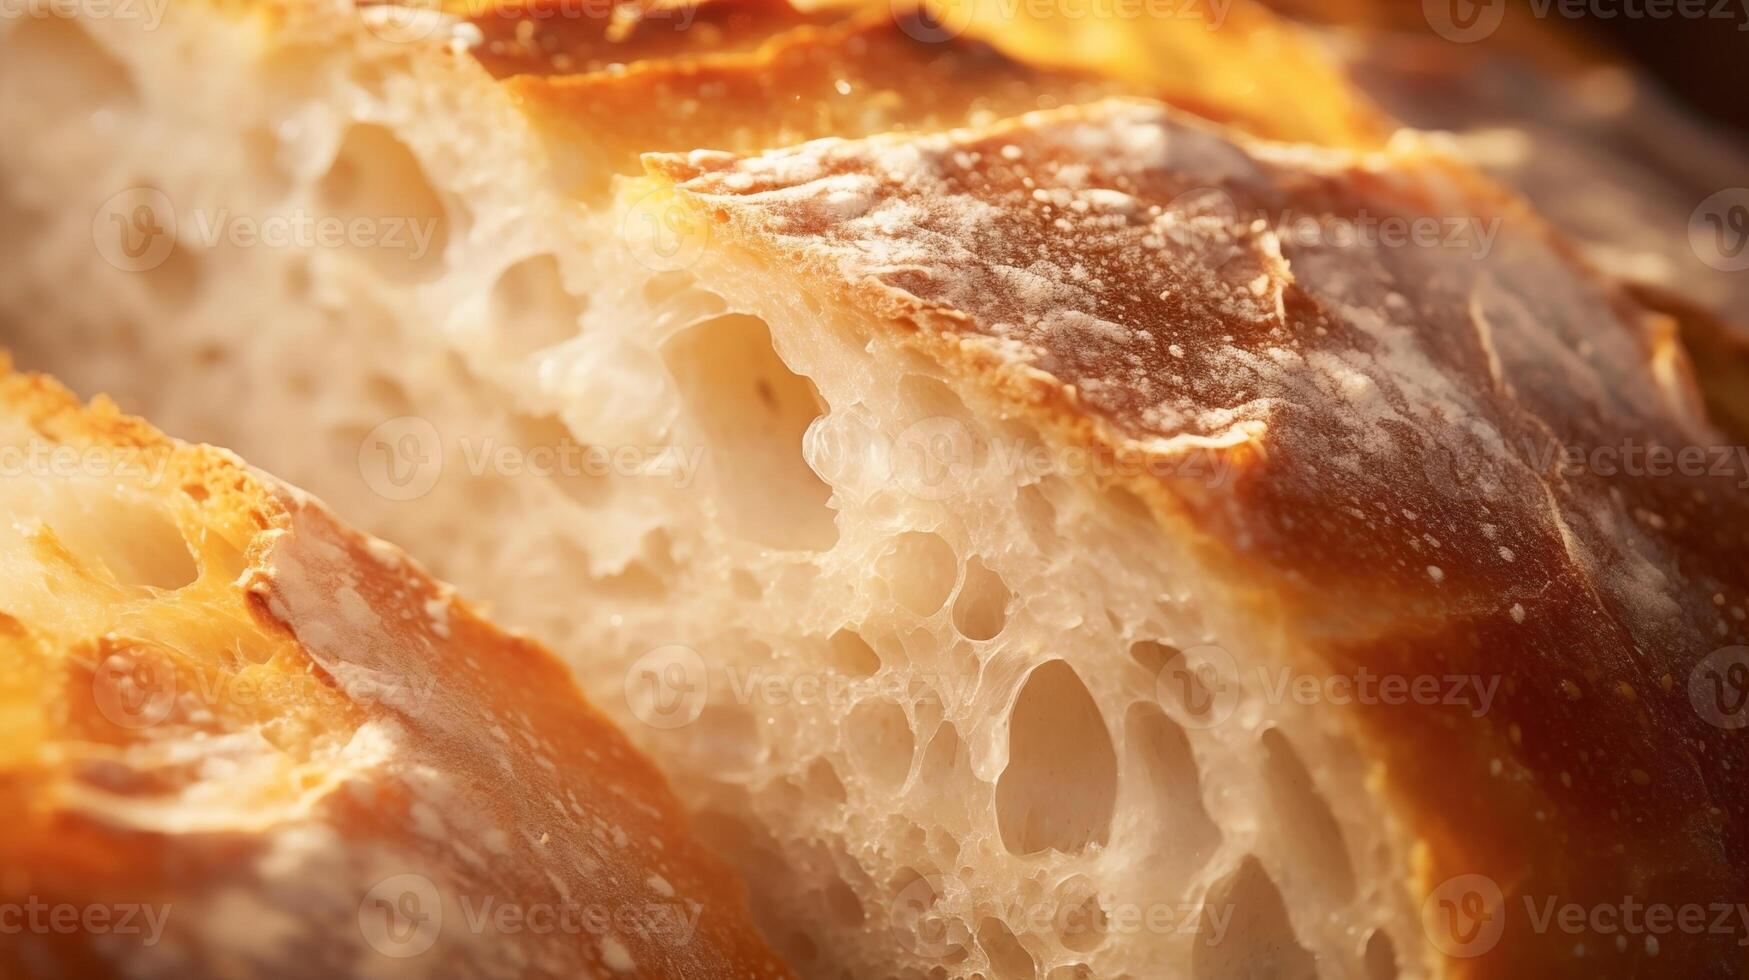 Extreme close-up of tasty bread. Food photography photo